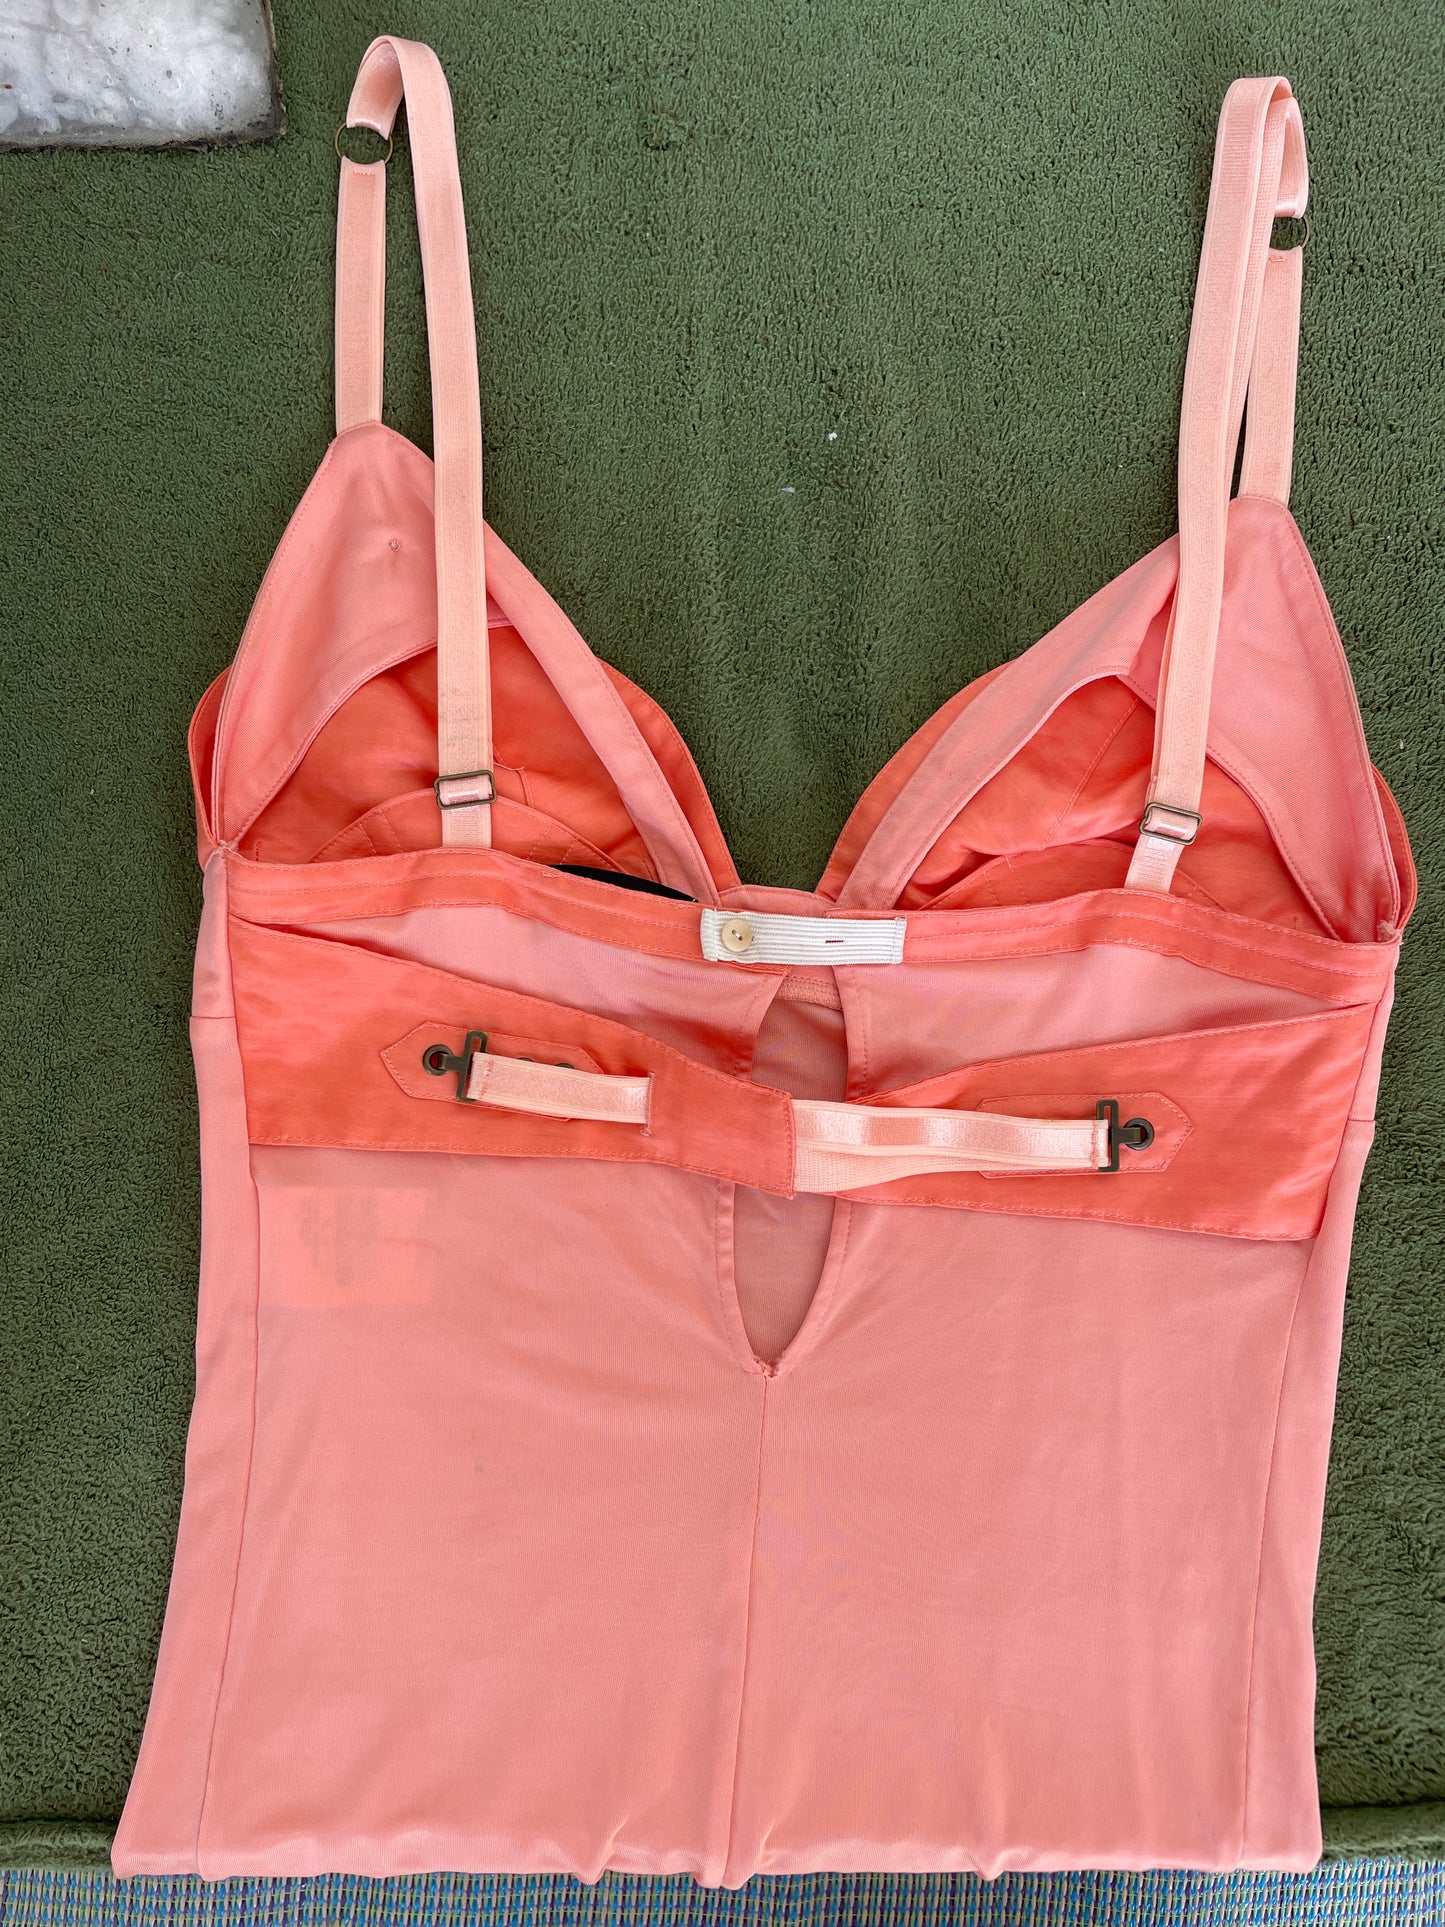 Costume National early 2000's salmon pink bustier top